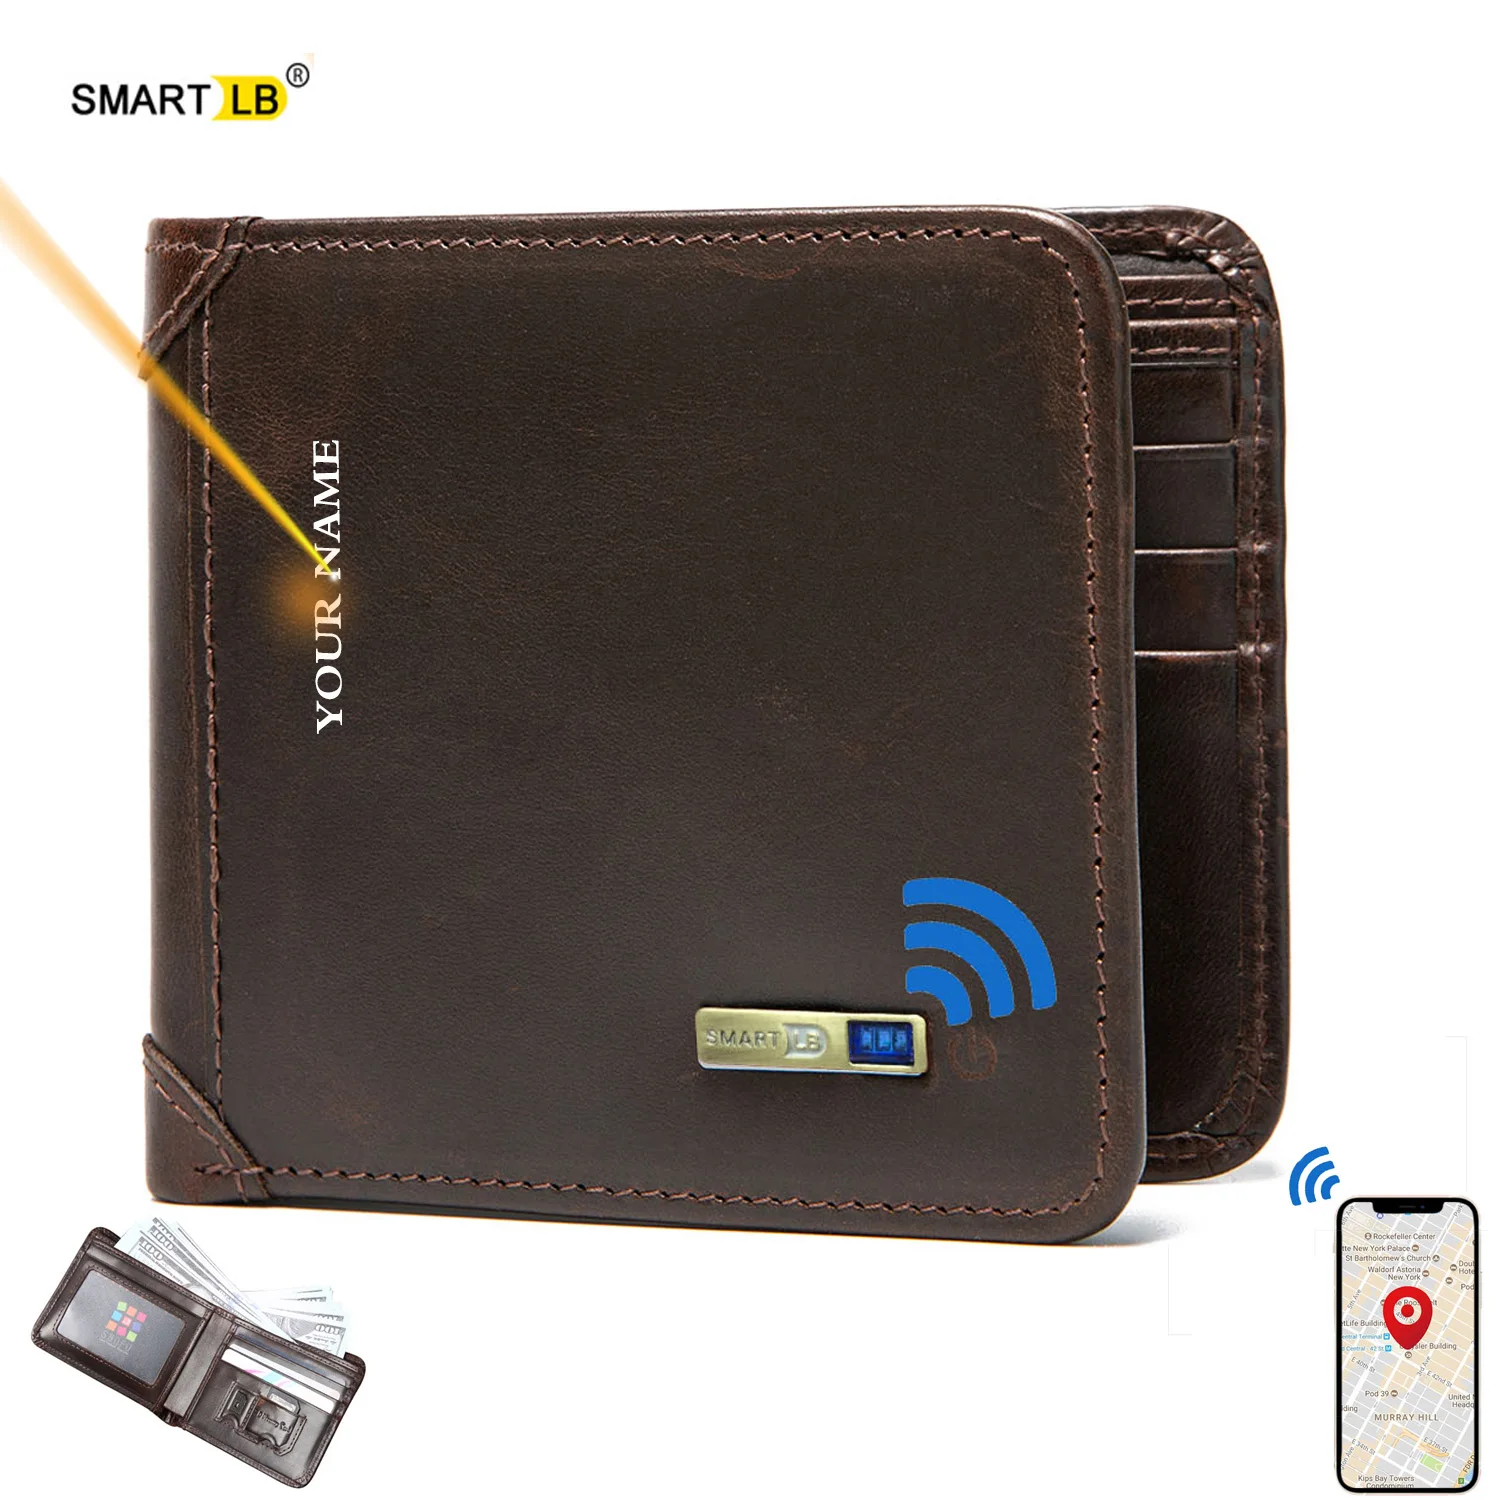 Aliexpress - Smart Wallet Tracker Genuine Leather Men Wallets Finder  Short Thin Card Holder Bluetooth-compatible Free engraving Cool Gift